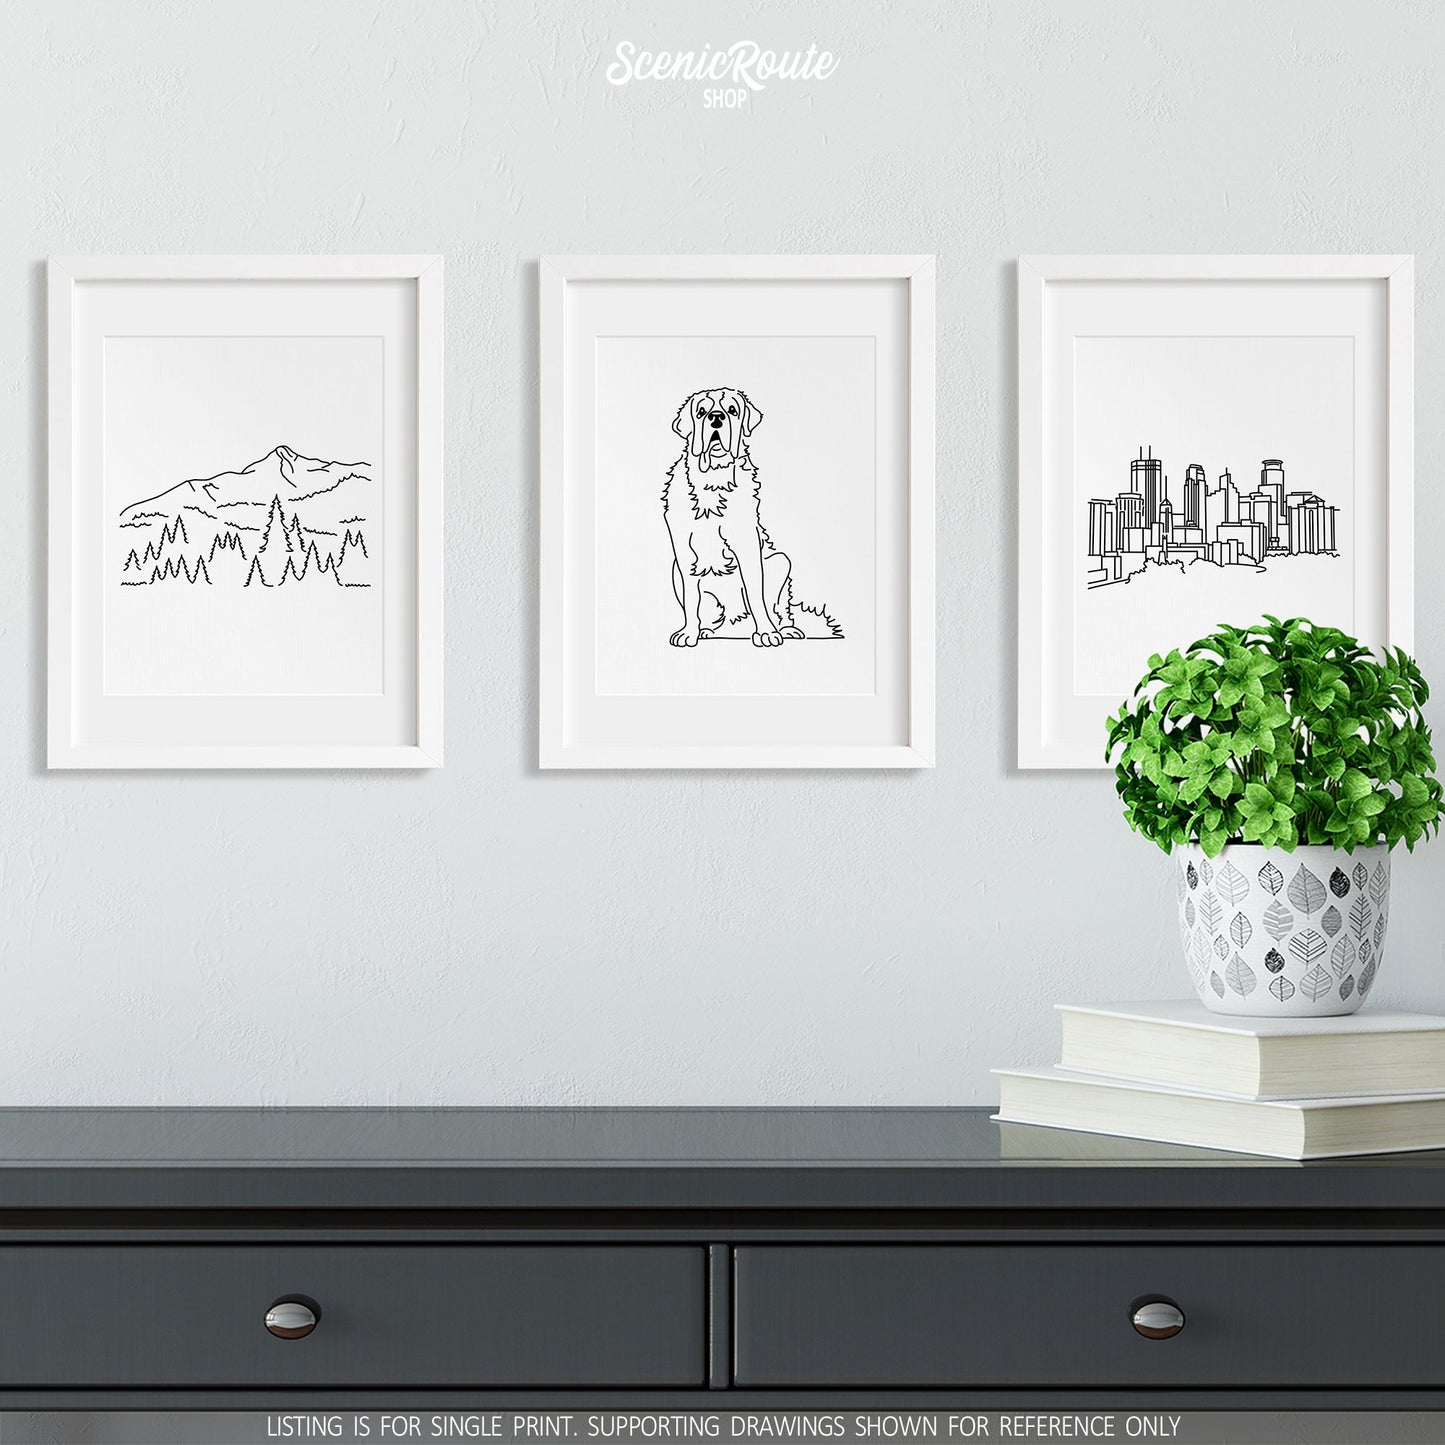 A group of three framed drawings on a white wall above a gray dresser with books and a plant. The line art drawings include Big Sky Montana, a Saint Bernard Dog, and the Minneapolis Skyline